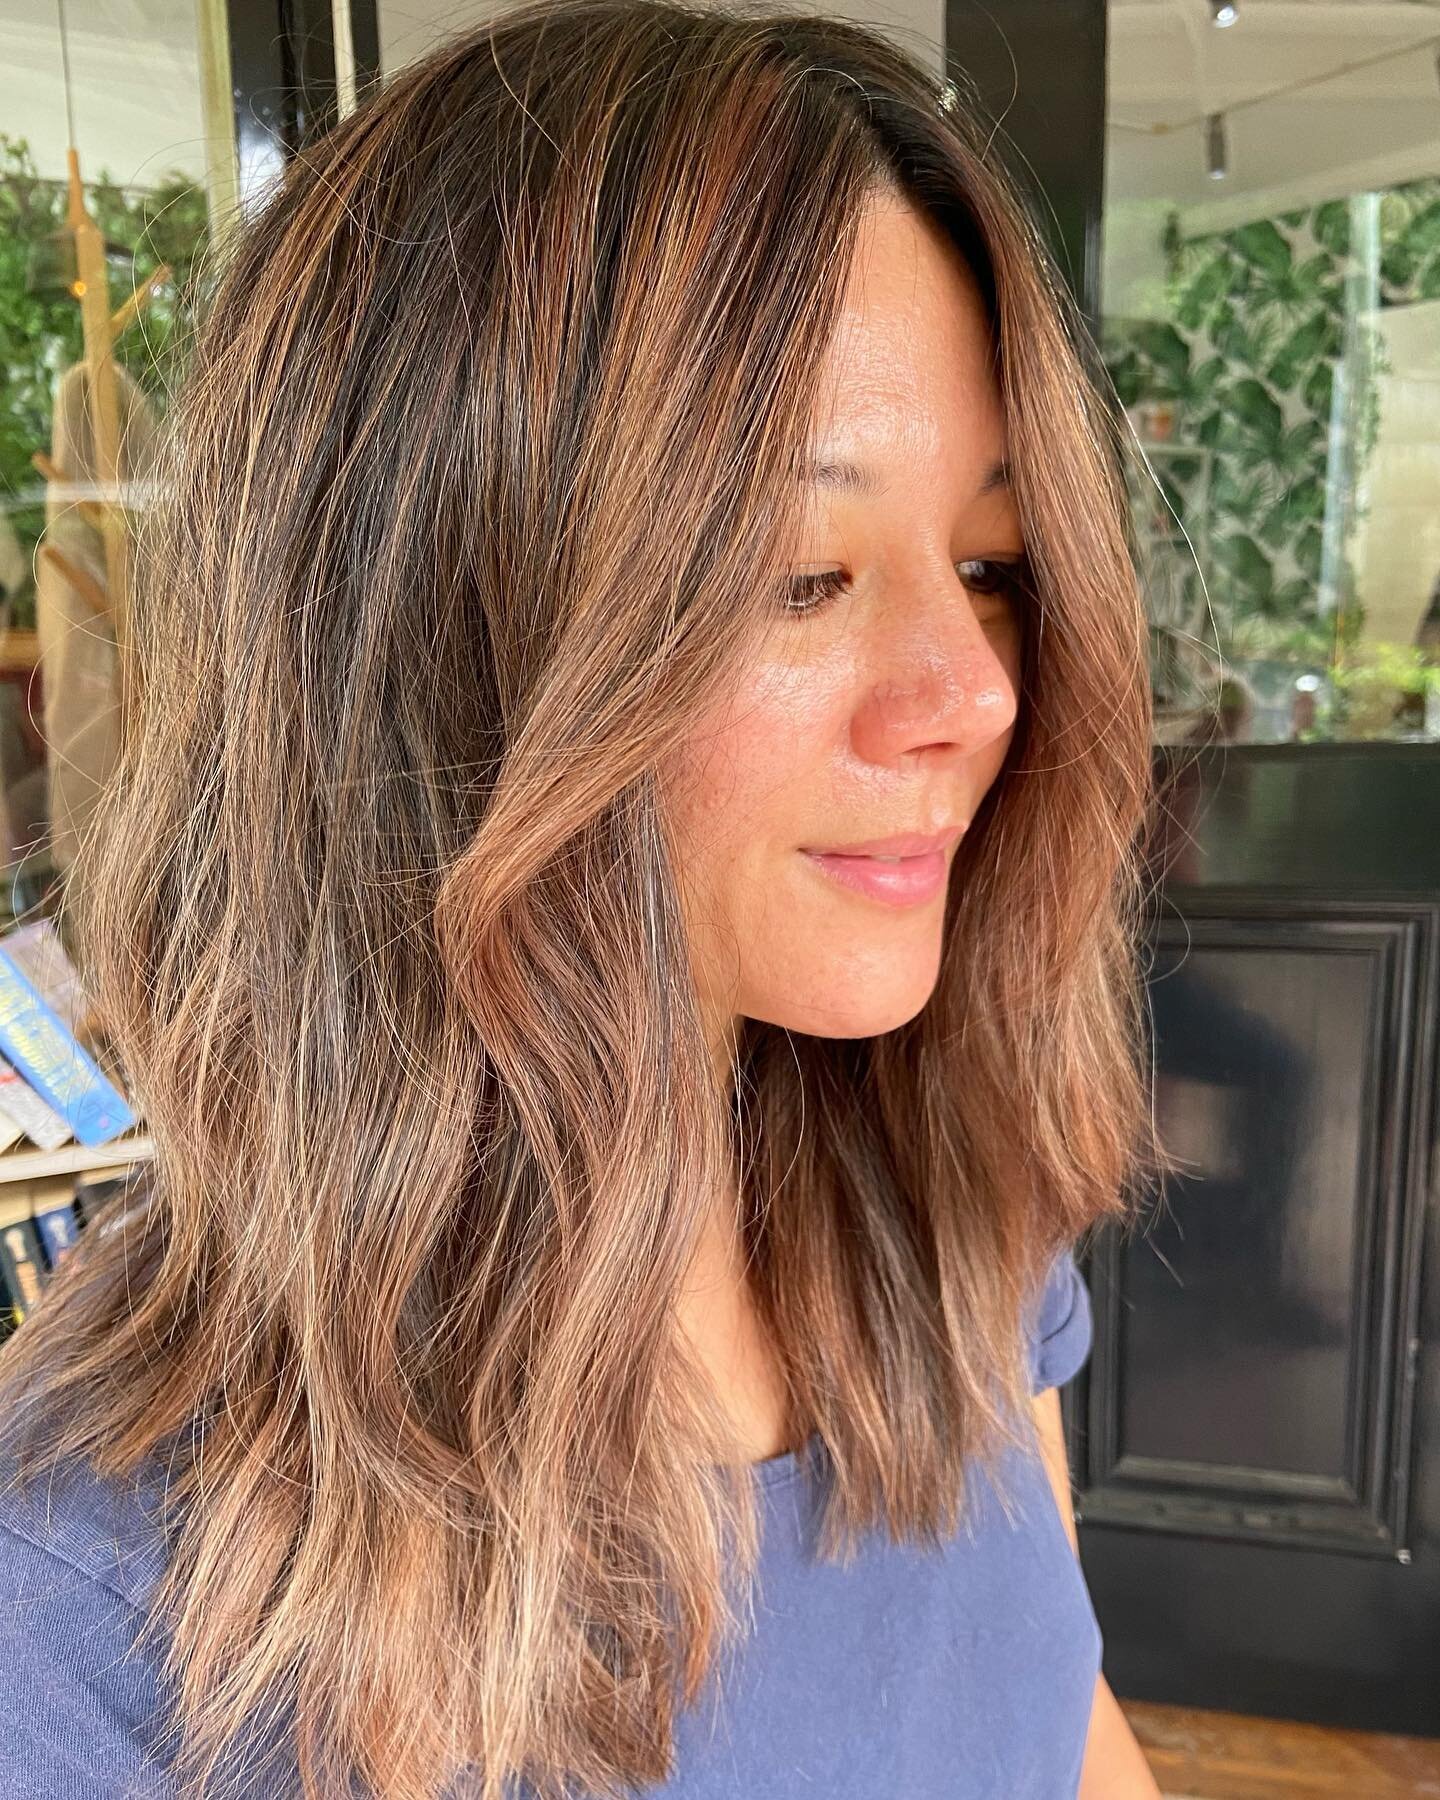 Warming Autumn tones for this lovely lady 🍂 

Balayage, cut and style by @nicinskip 

#sustainablesalon #sustainablehairdresser #sustainableliving #livedinblonde #balayage #blonde #blondehighlights #newhair #sydneyhairdresser #sydneystylist #sydneyc